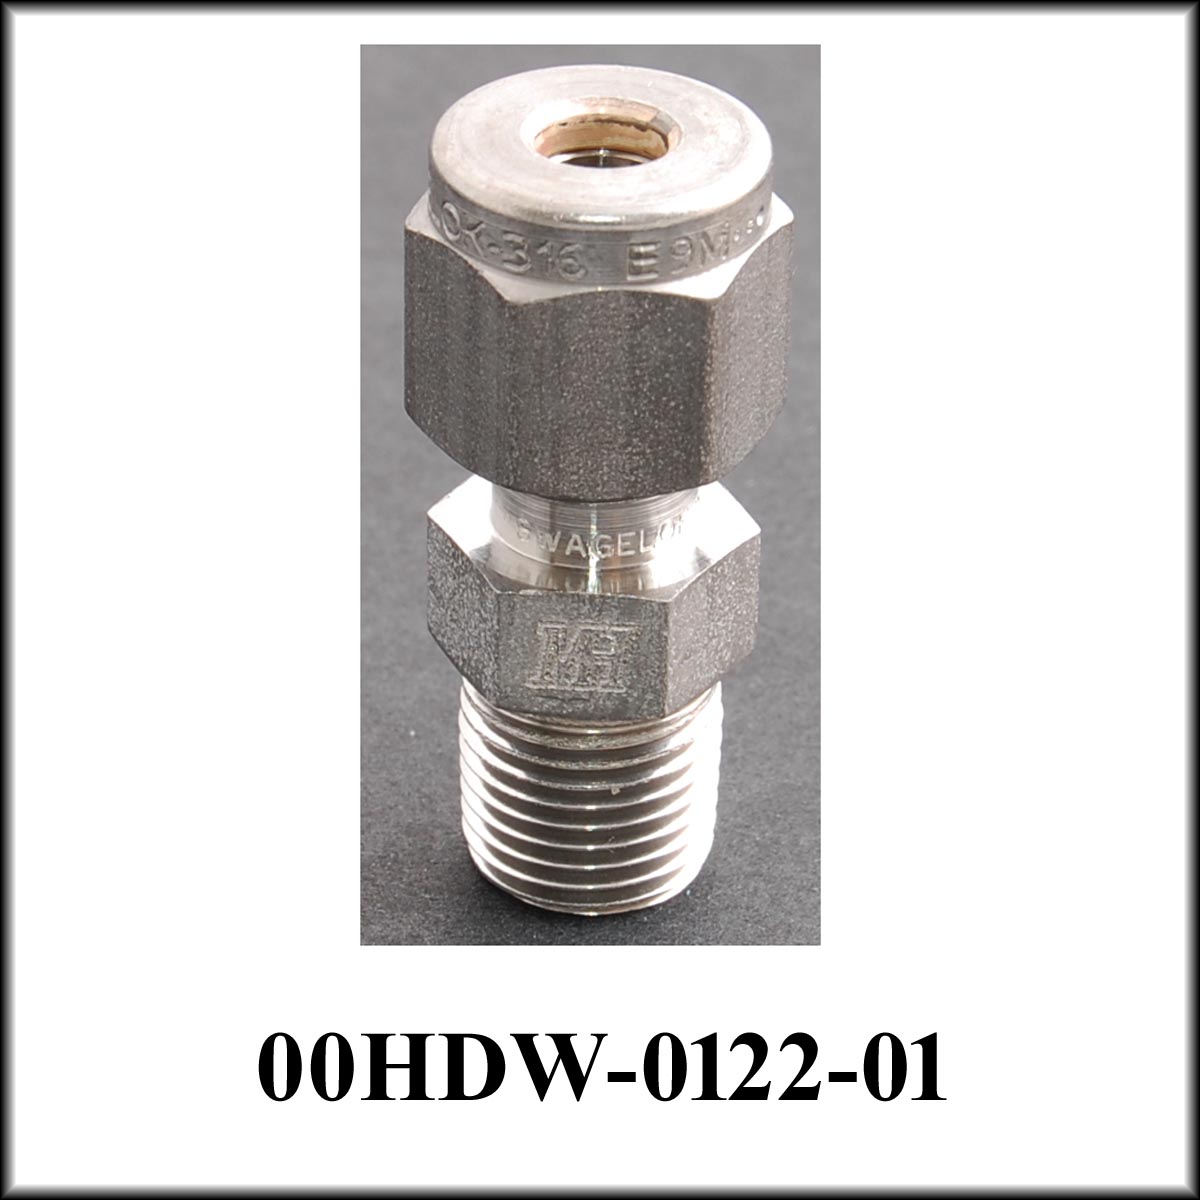 Tube Fitting 1/8 NPT-M to 3/16 Compression, Stainless Steel